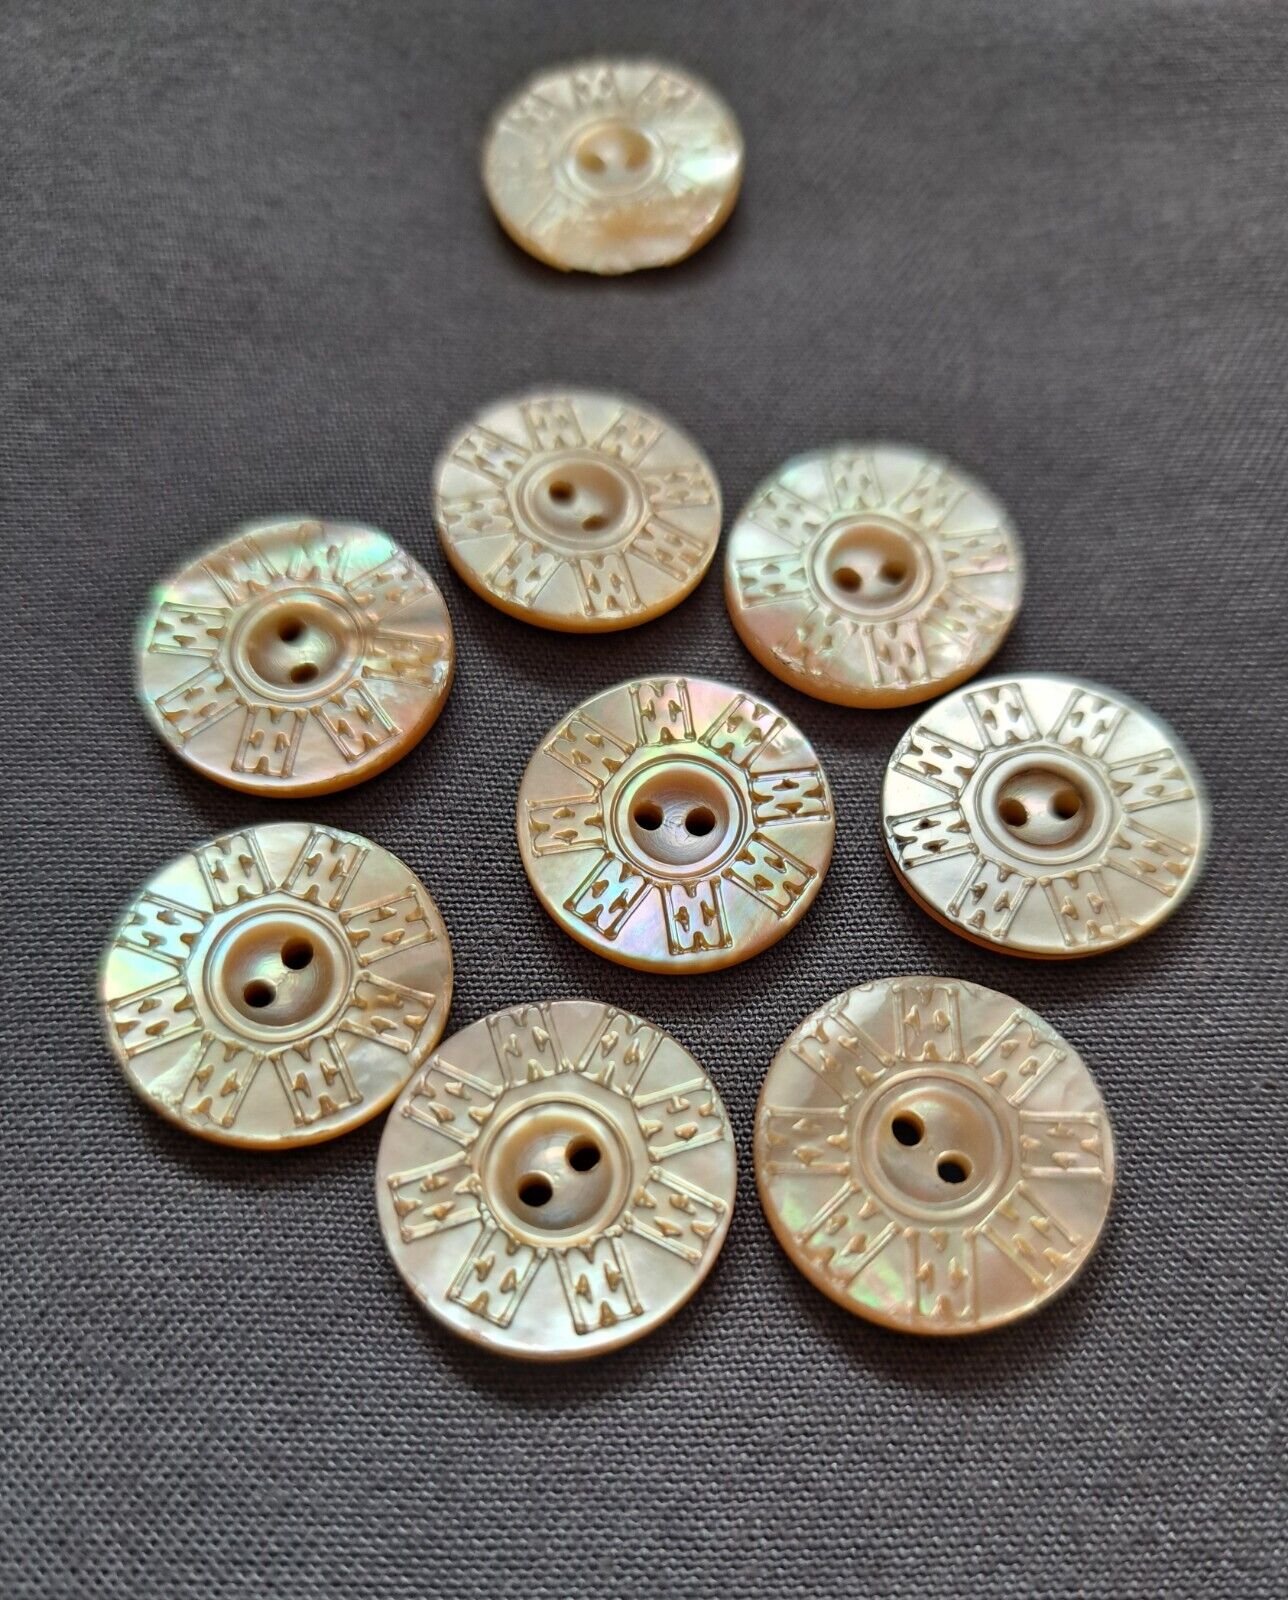 Vintage 1930 8 pcs Carved Real Thick Mother of Pearl Buttons 18mm + 1 Bonus